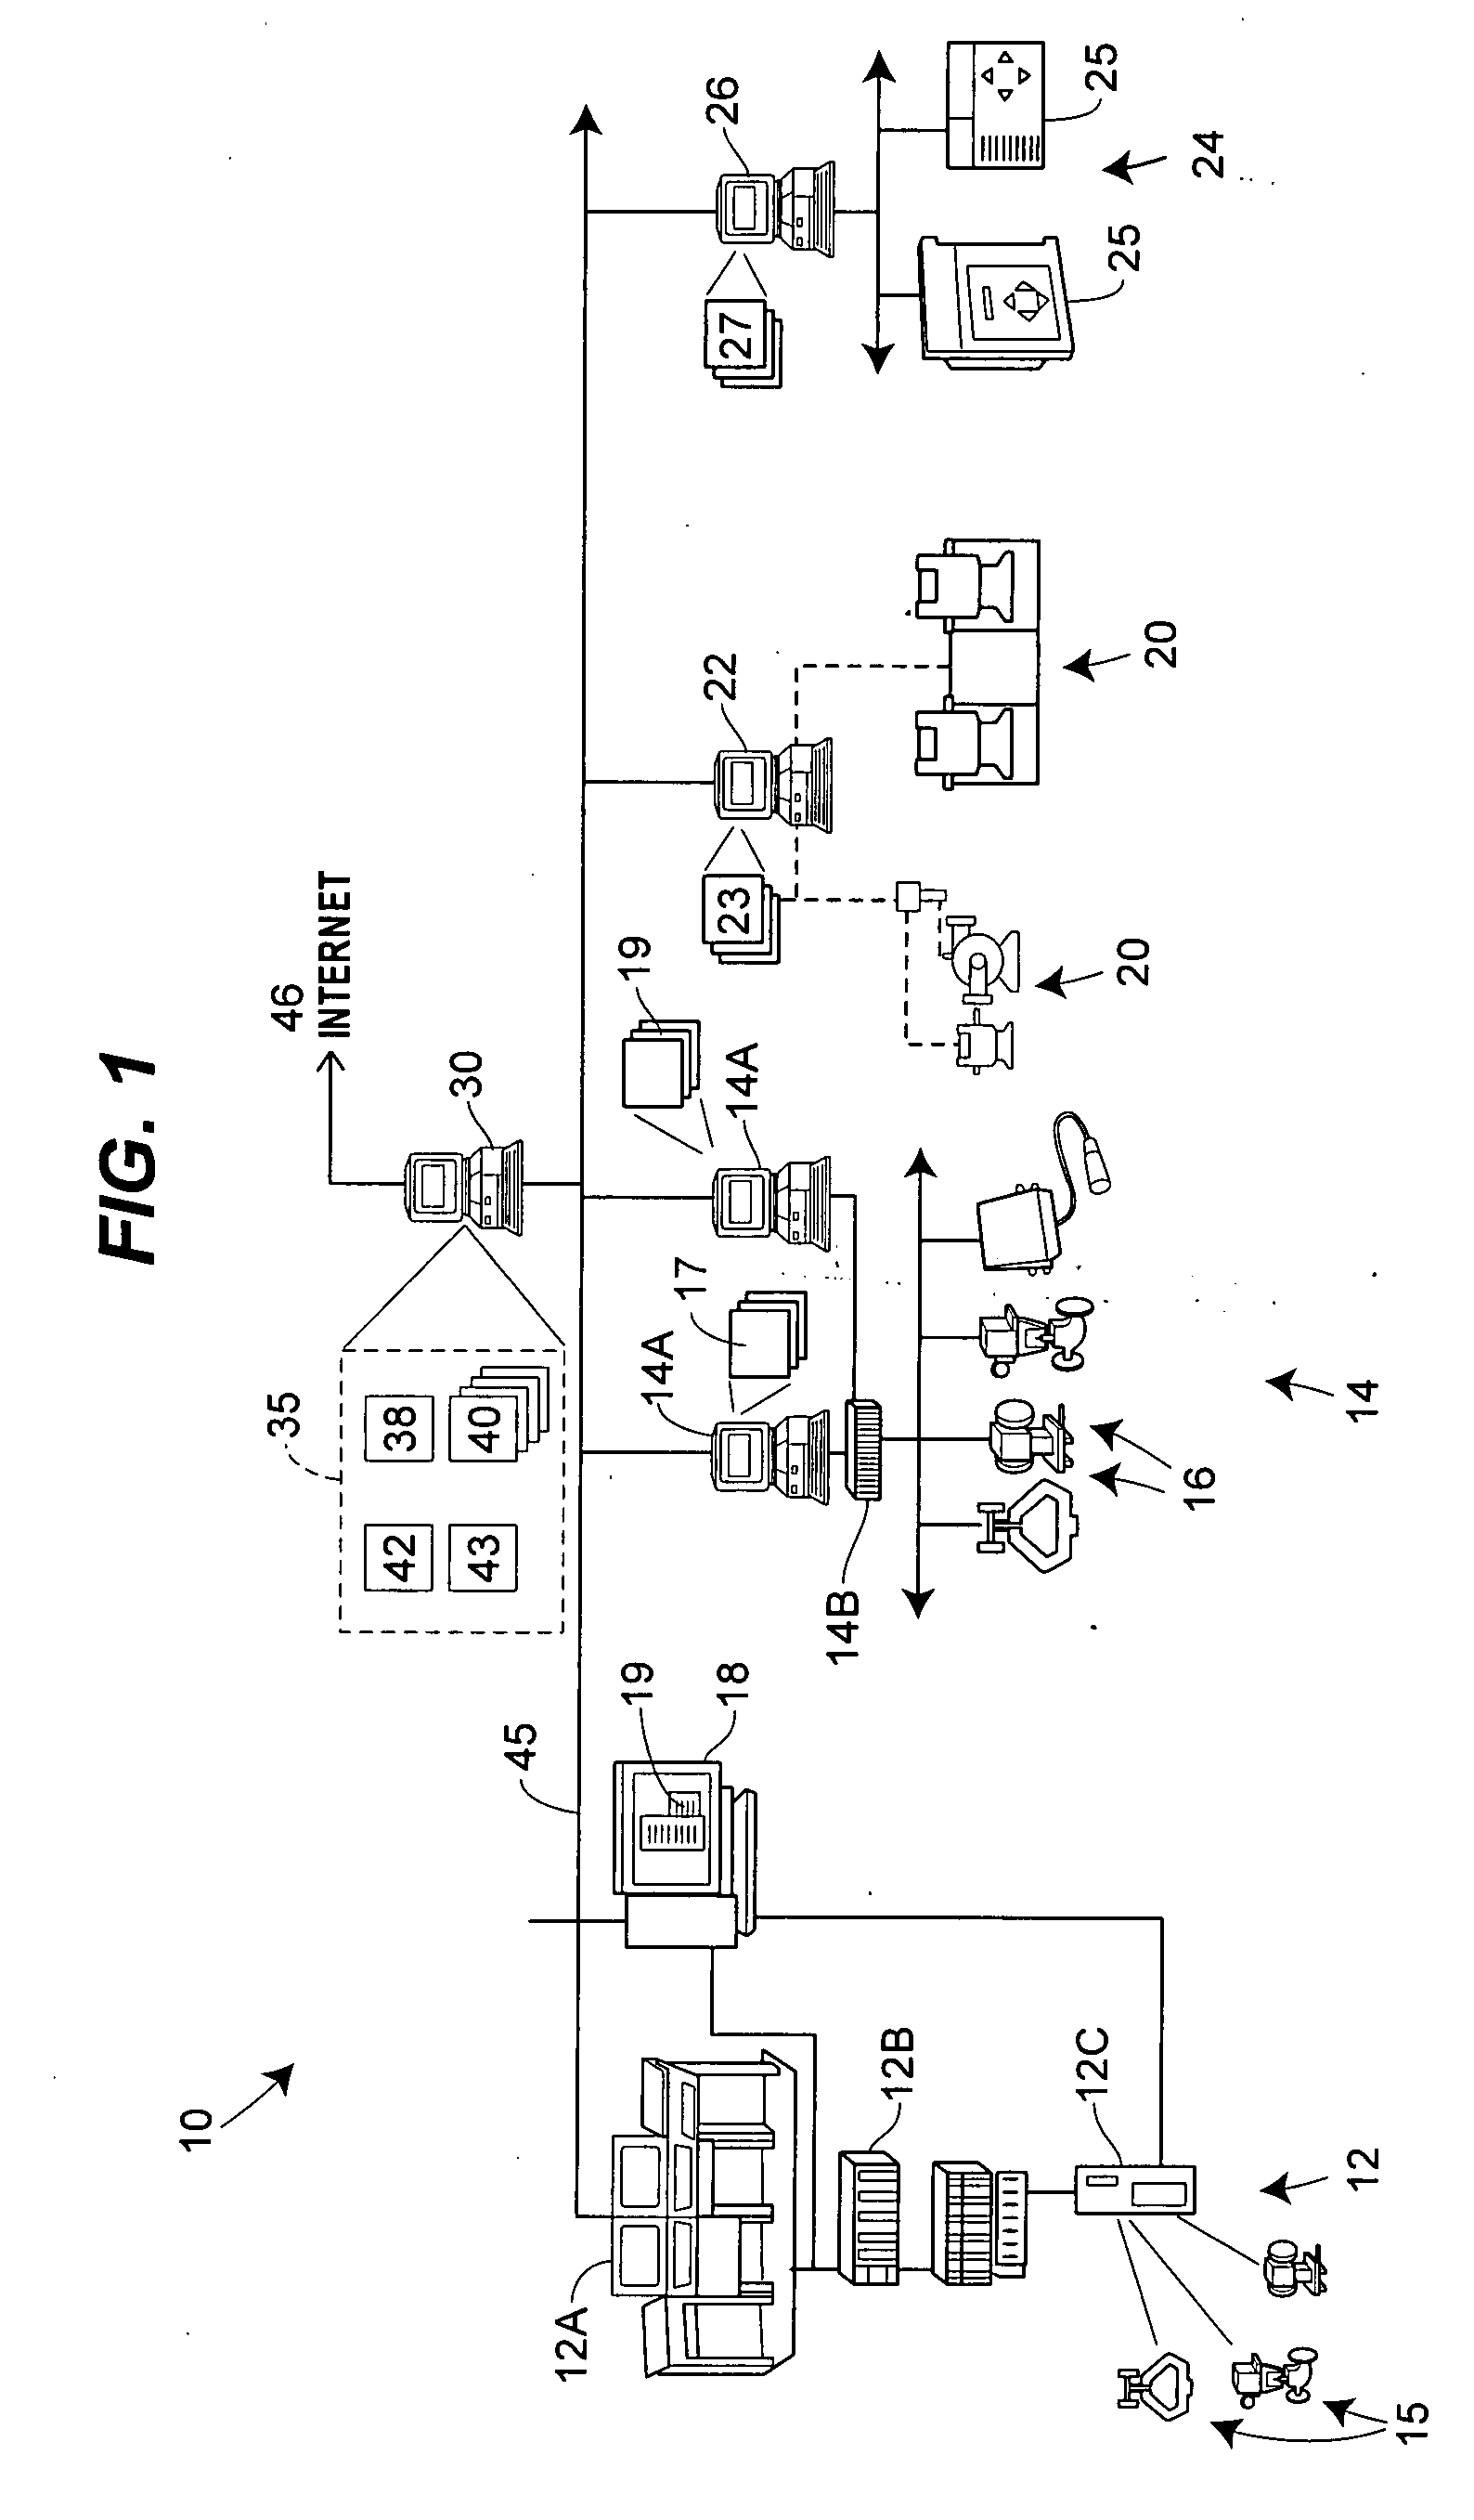 Multivariate monitoring and diagnostics of process variable data